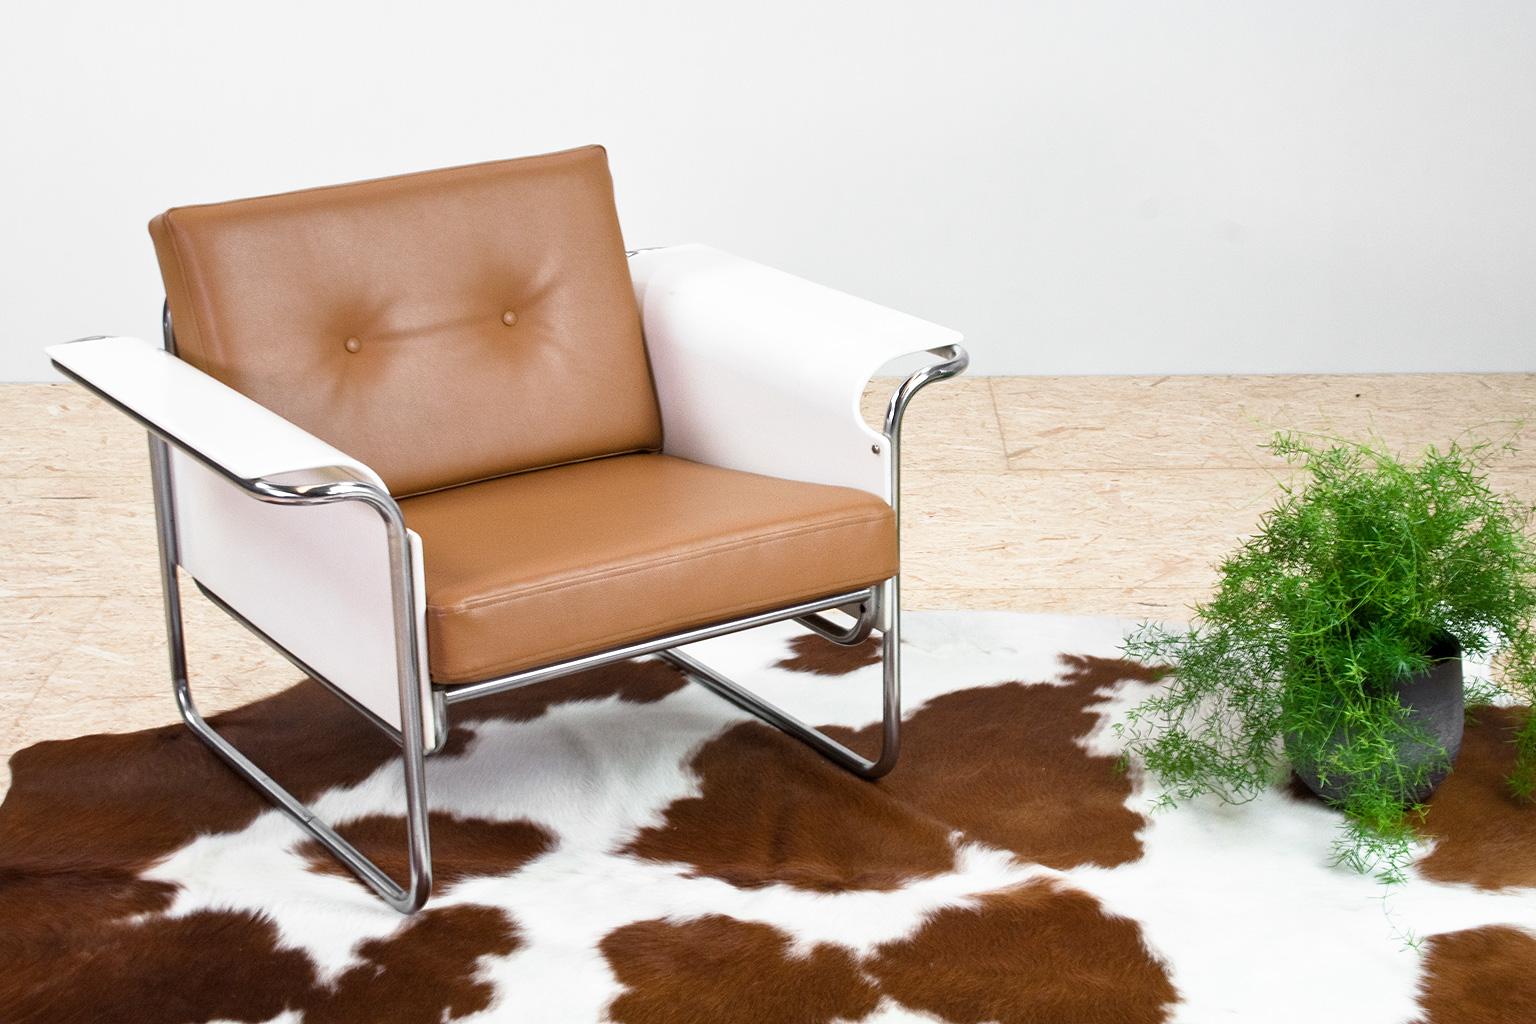 Scandinavian Modern armchair new upholstered in a tan colored faux leather upholstery. The flared armrests are made of (white lacquered) bent plywood, placed in a chromed metal tubular frame that without a doubt was inspired by the Bauhaus